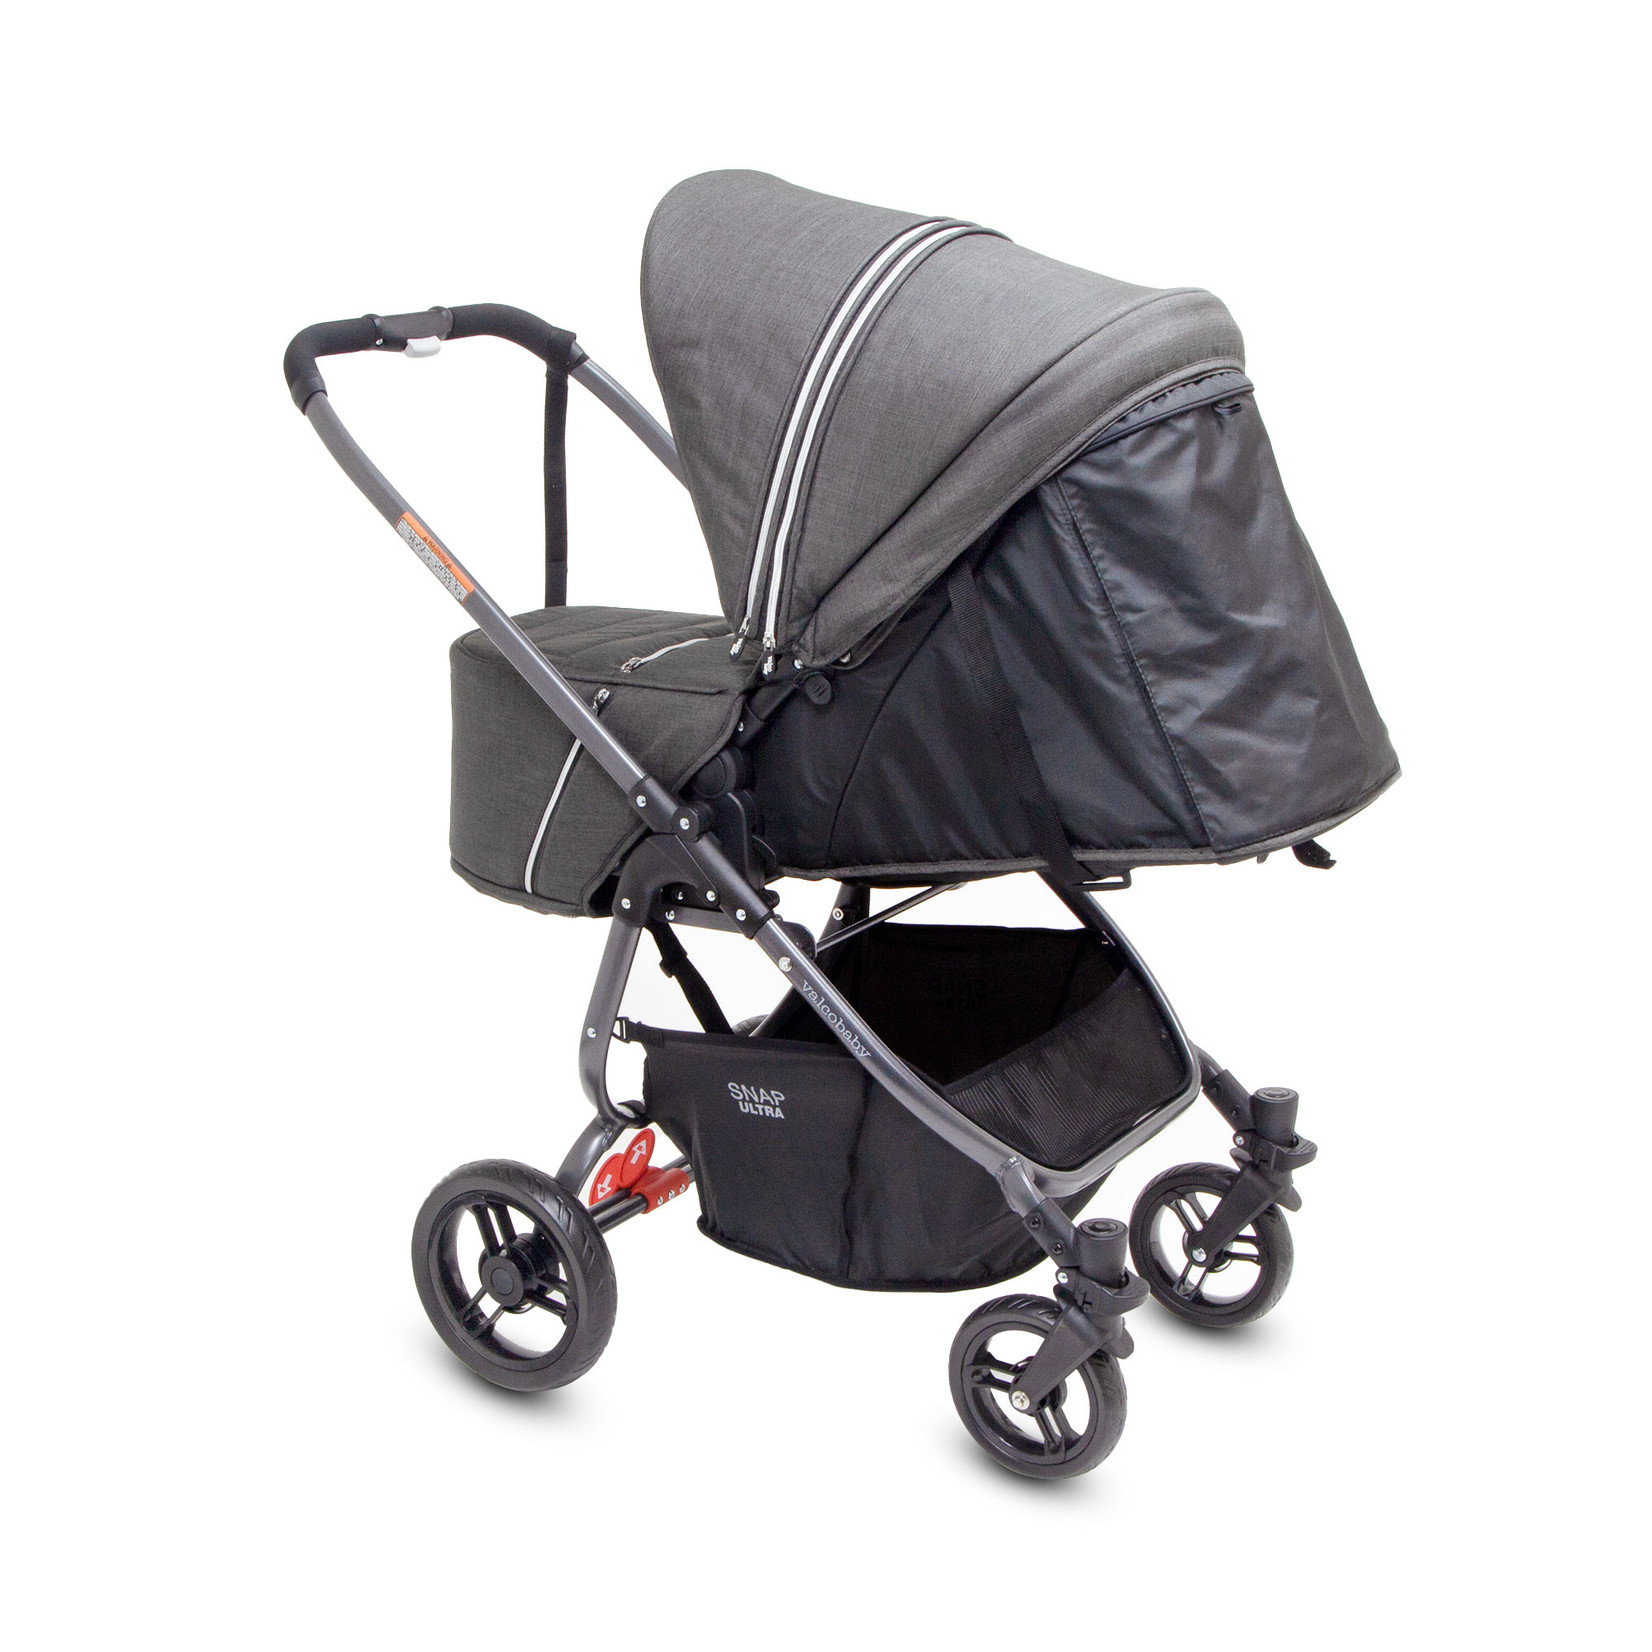 Valco Baby Snap Ultra Tailormade-Charcoal